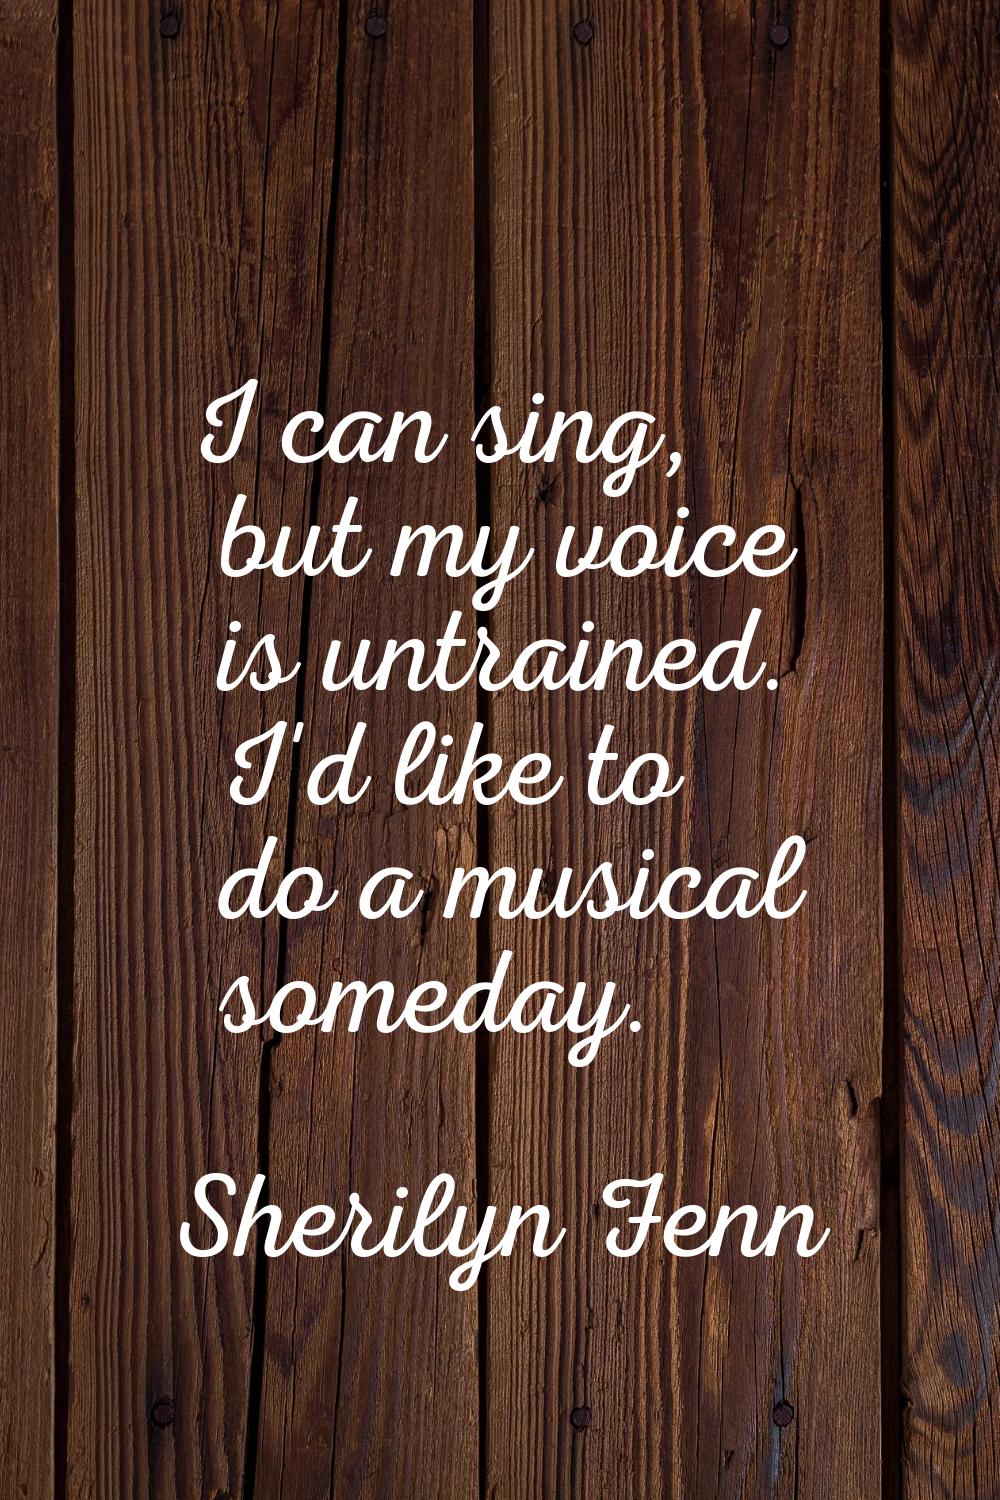 I can sing, but my voice is untrained. I'd like to do a musical someday.